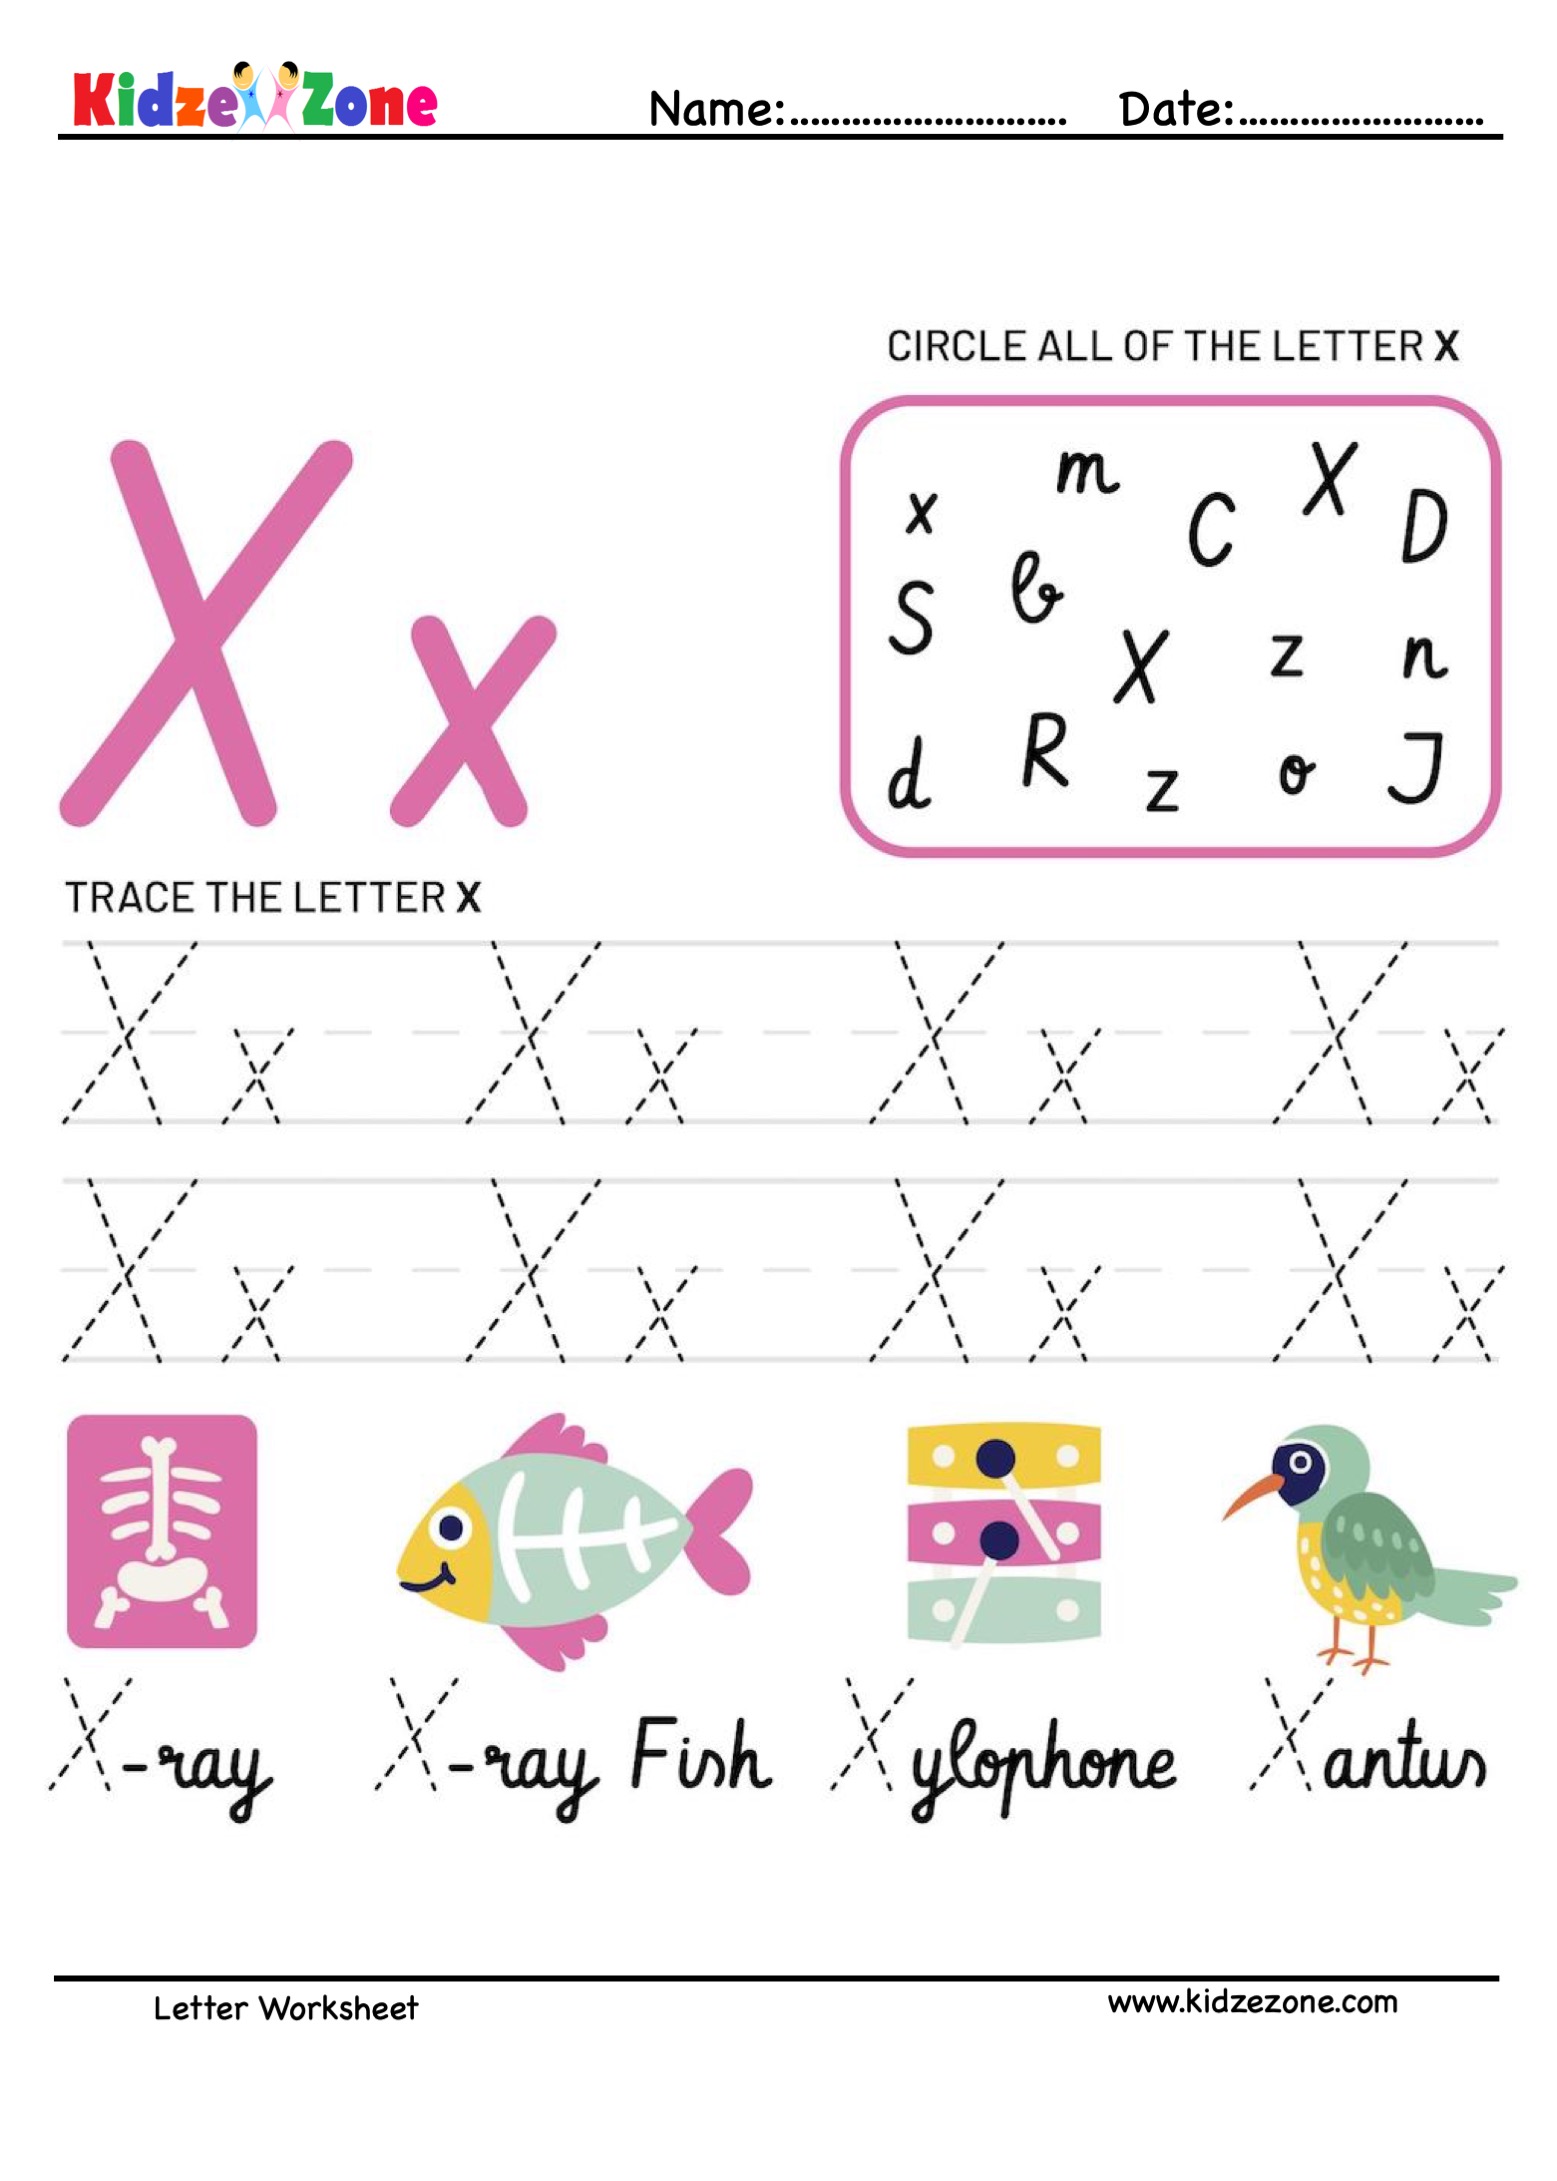 Kindergarten Letter X Reading, Writing and Activity Worksheets